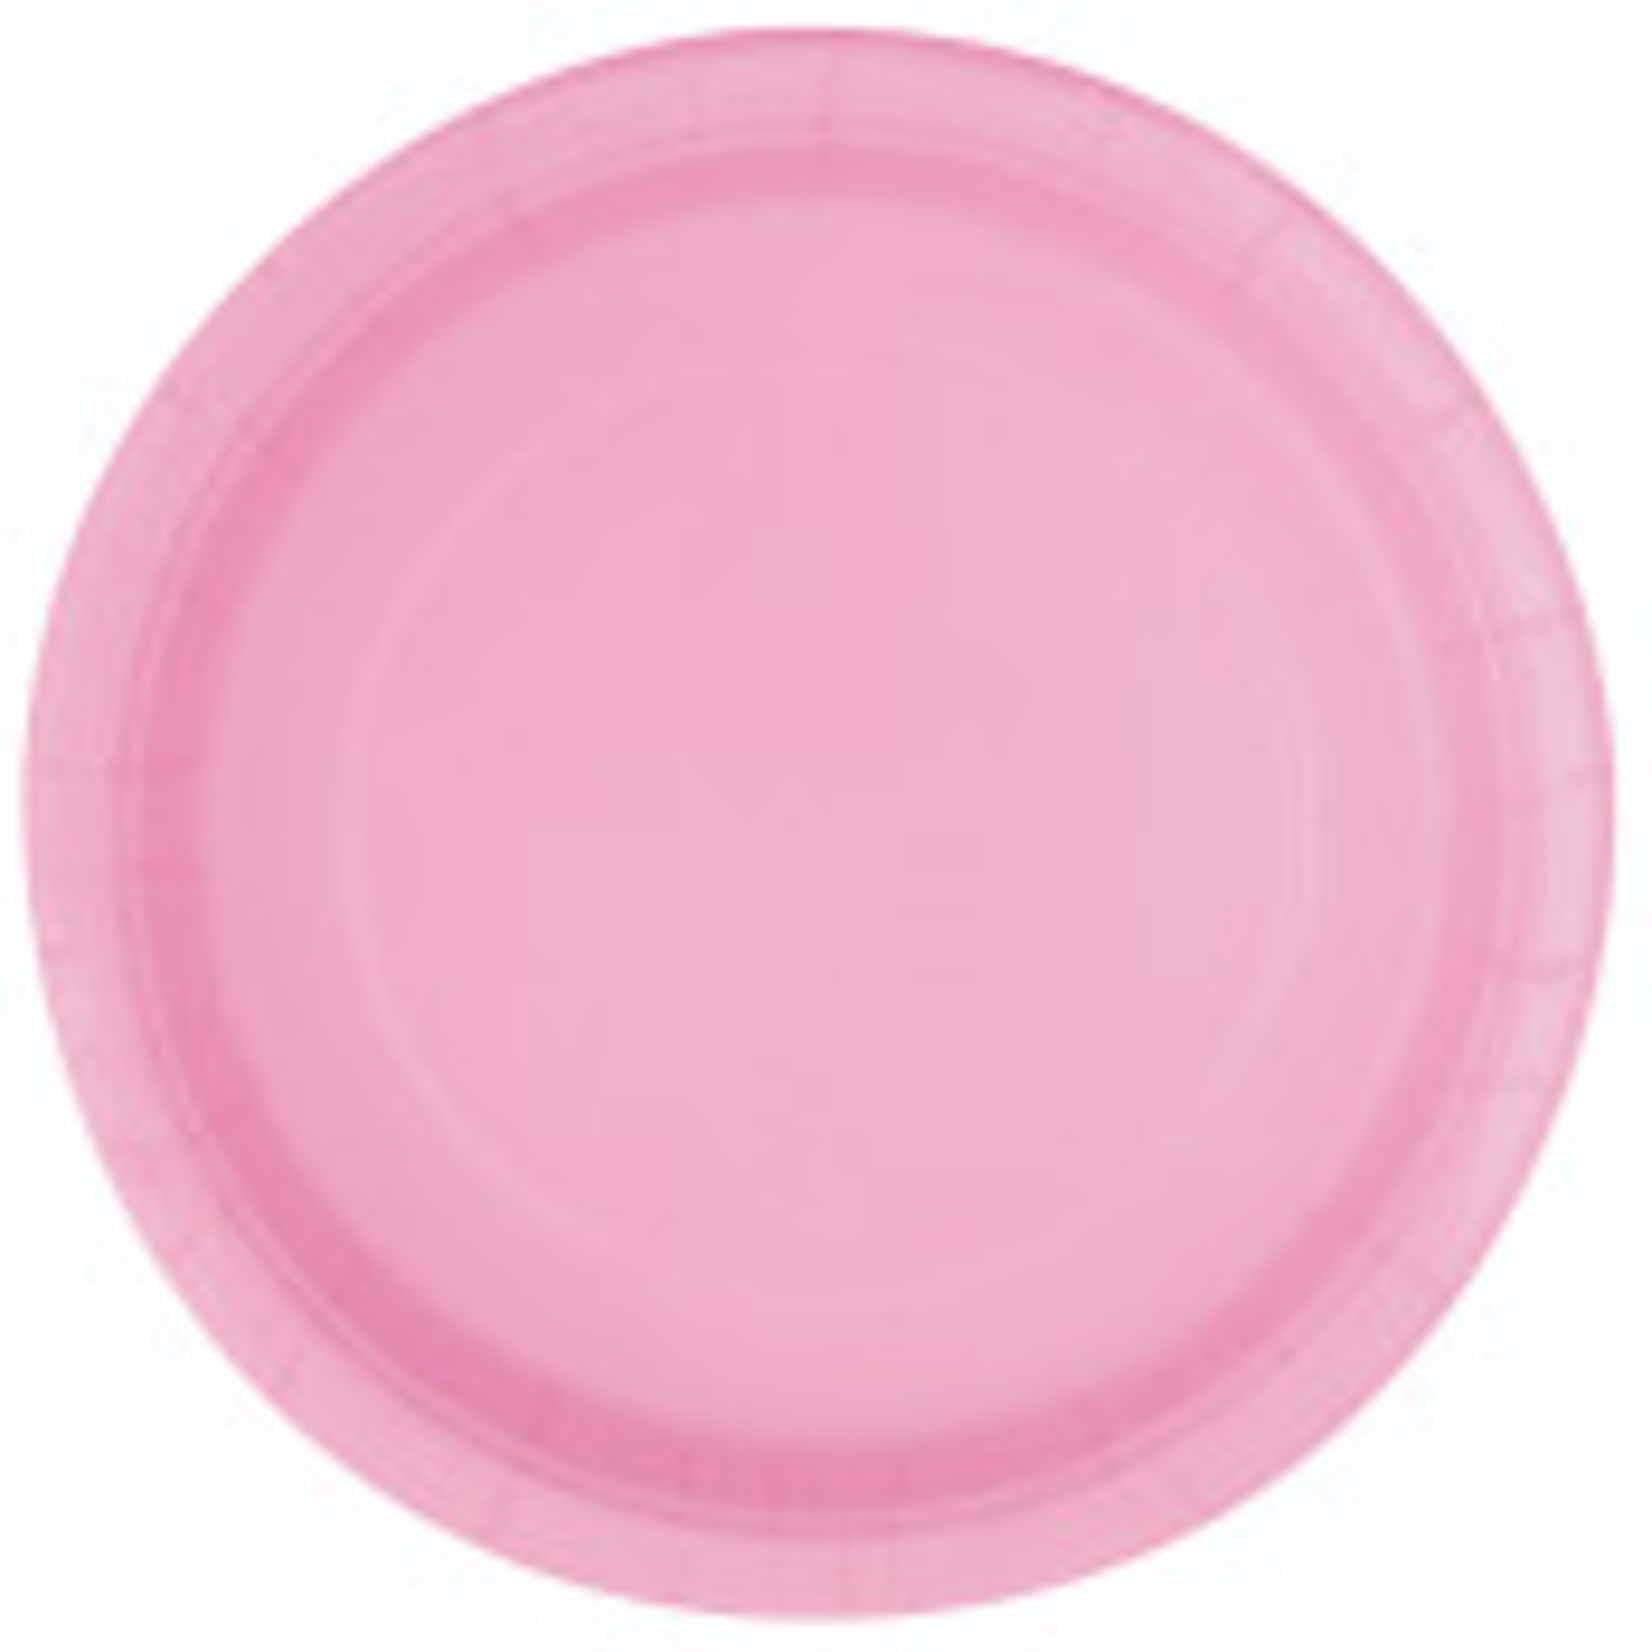 LOVELY PINK 6 AND 3/4” PLATES